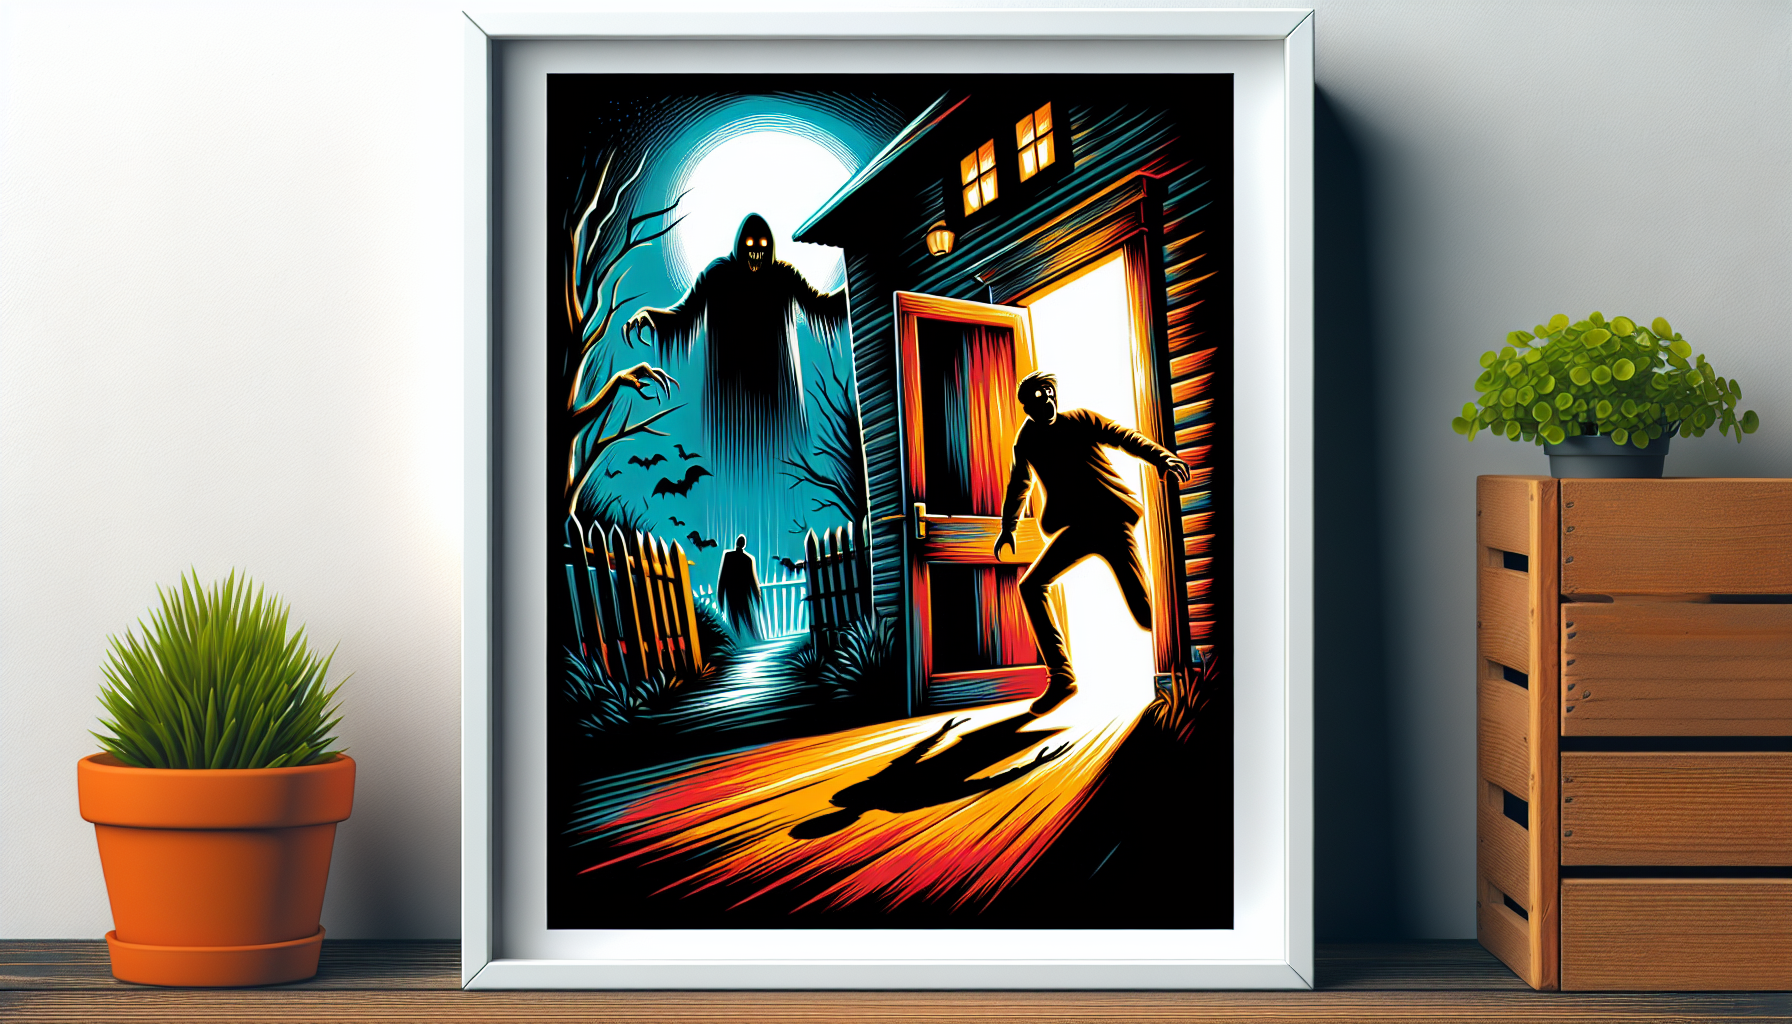 An eerie, dimly lit haunted house with a shadowy figure suddenly jumping out from behind a door, as viewed from the perspective of a frightened audience, capturing the intense moment of shock and fear